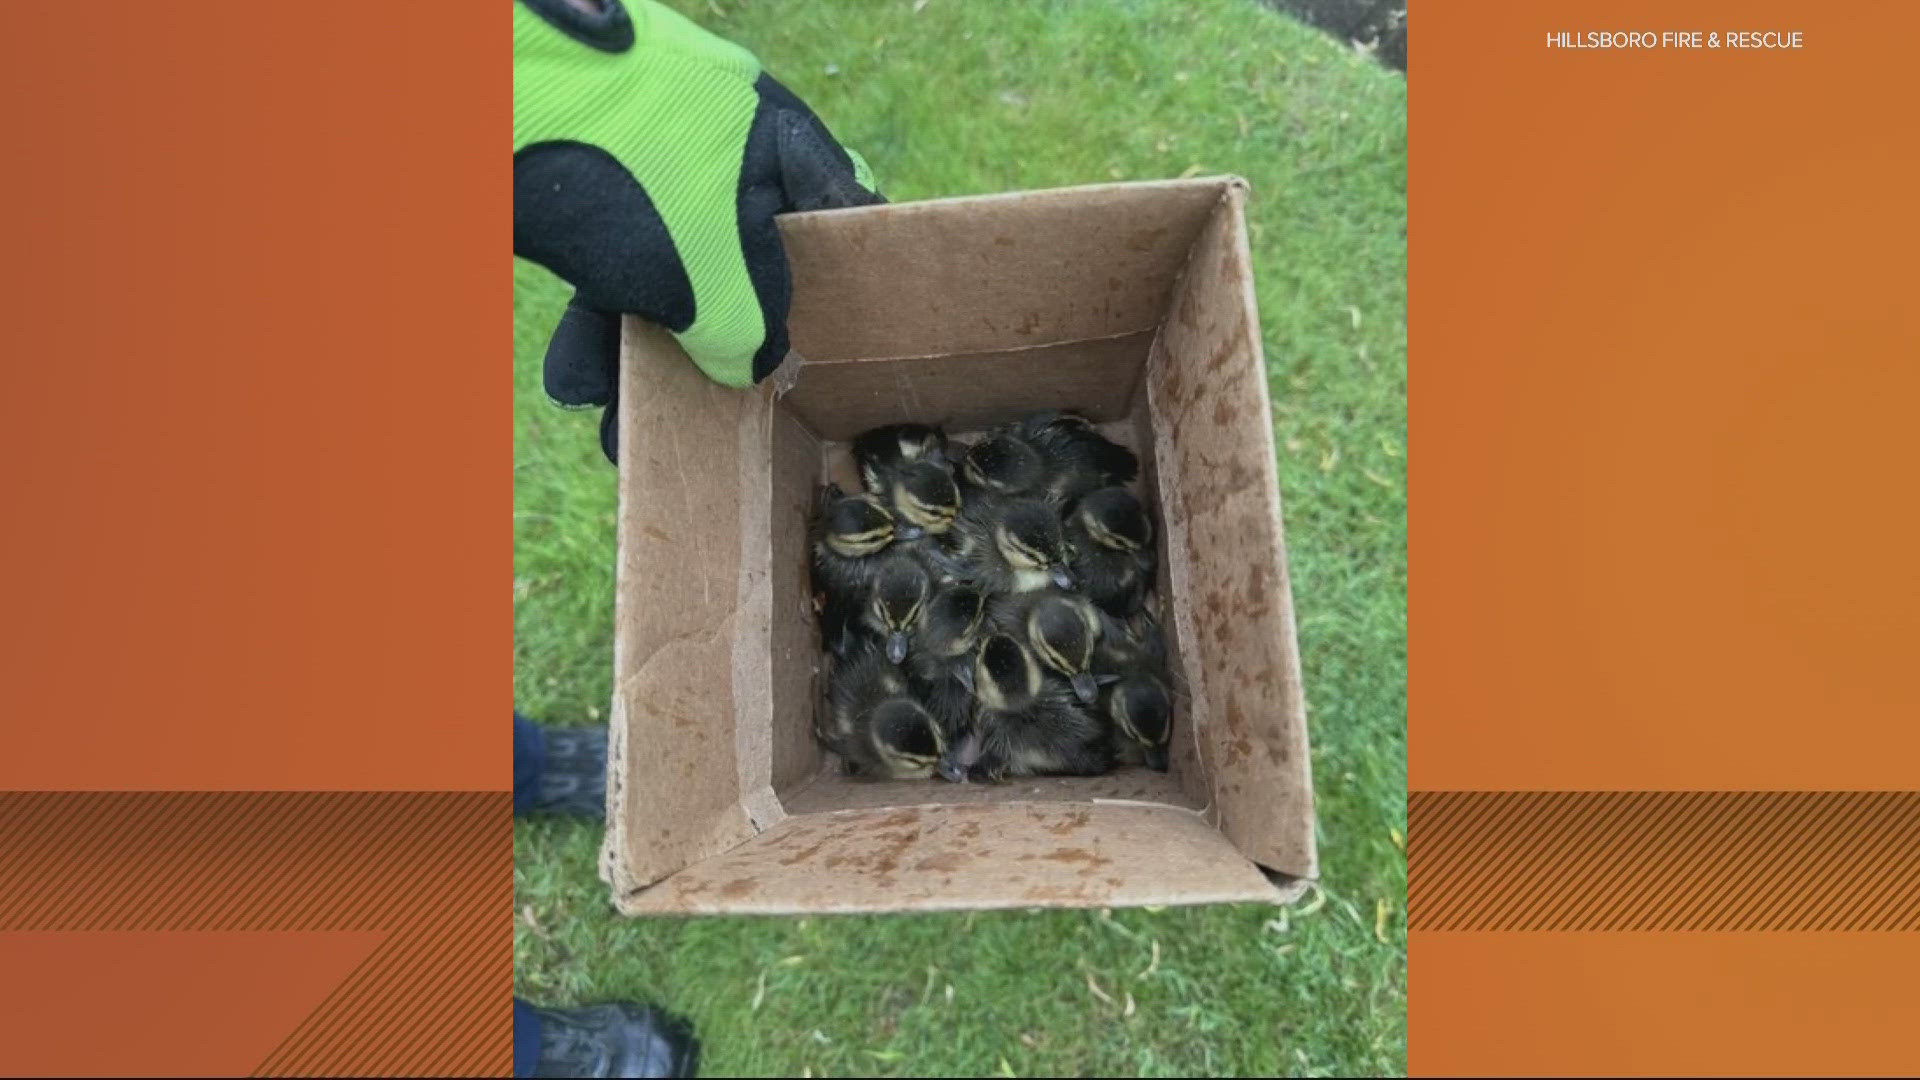 Eleven ducklings got trapped Friday evening but were pulled out by Hillsboro Fire and Rescue.